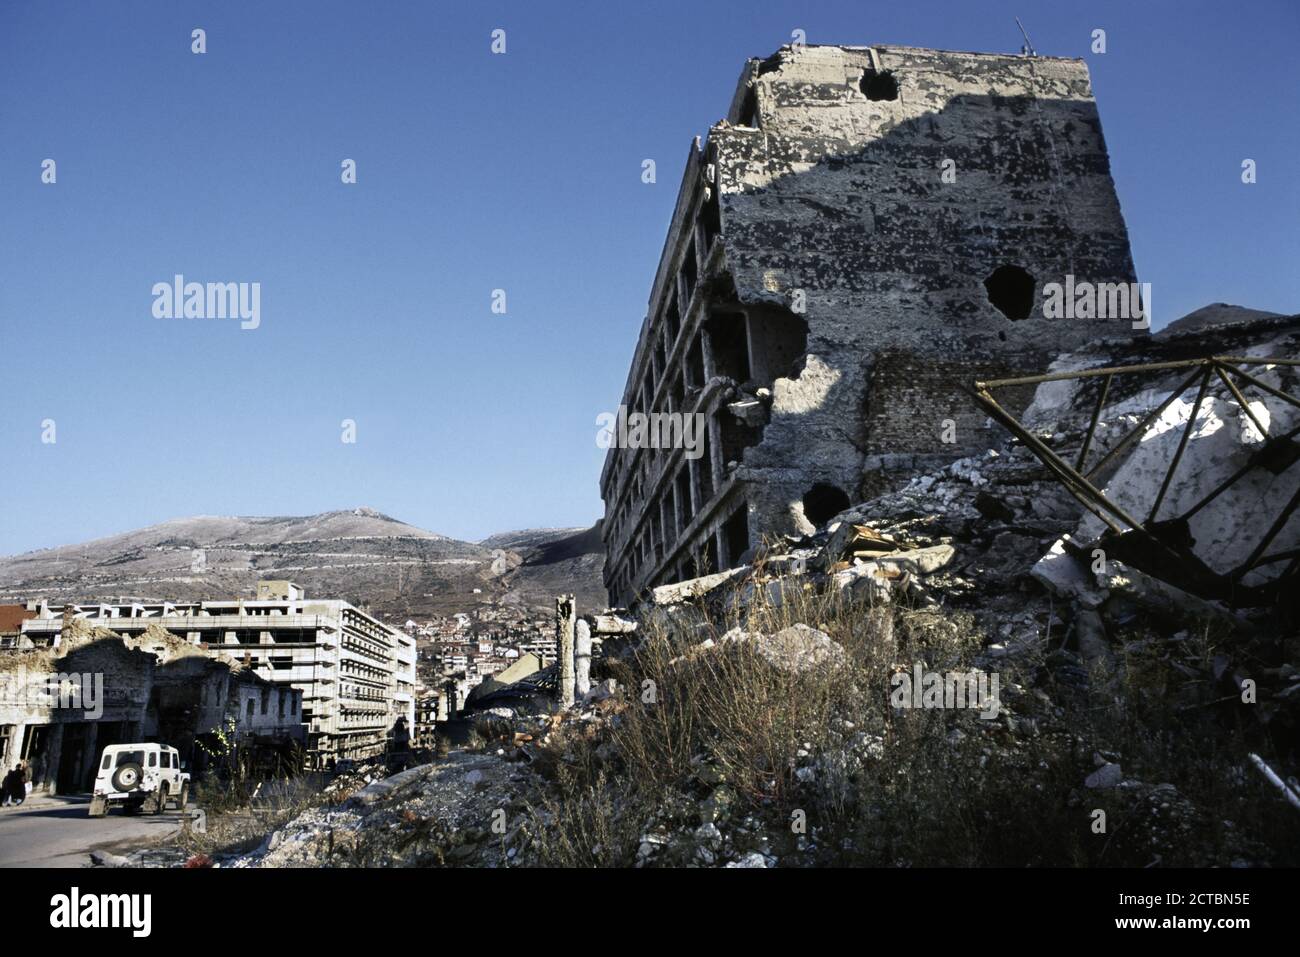 10th December 1995 During the war in Bosnia: destroyed buildings at the junction of Mostarskog bataljona and Bulevar in Mostar. Stock Photo